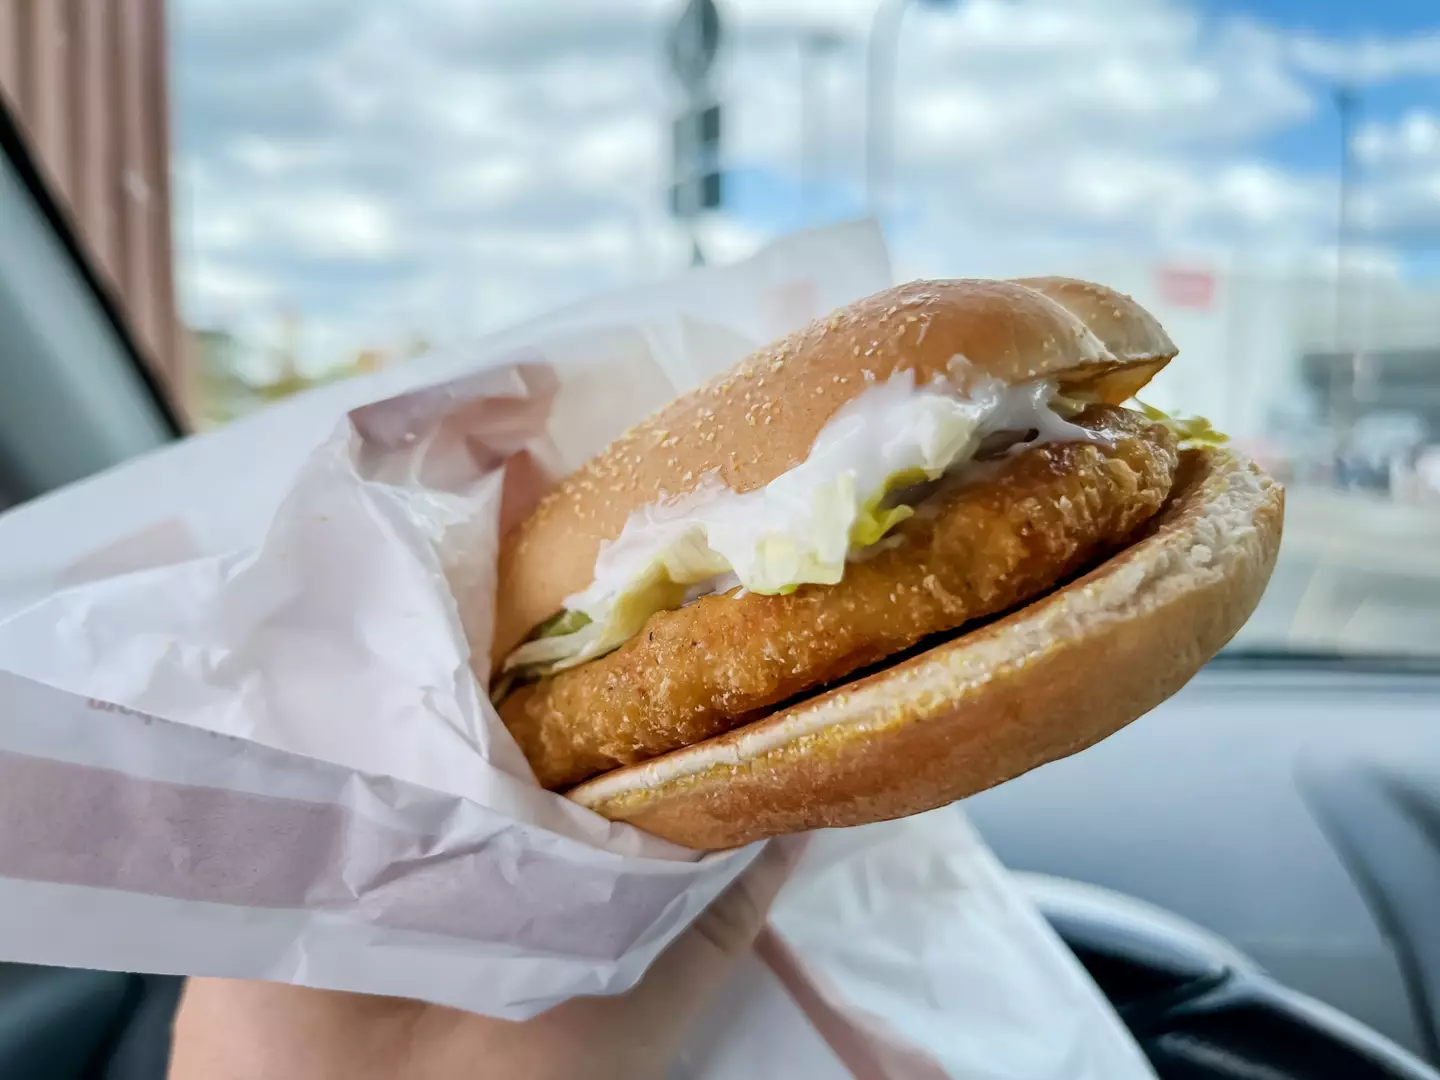 You can buy a McChicken sandwich for £1.39.